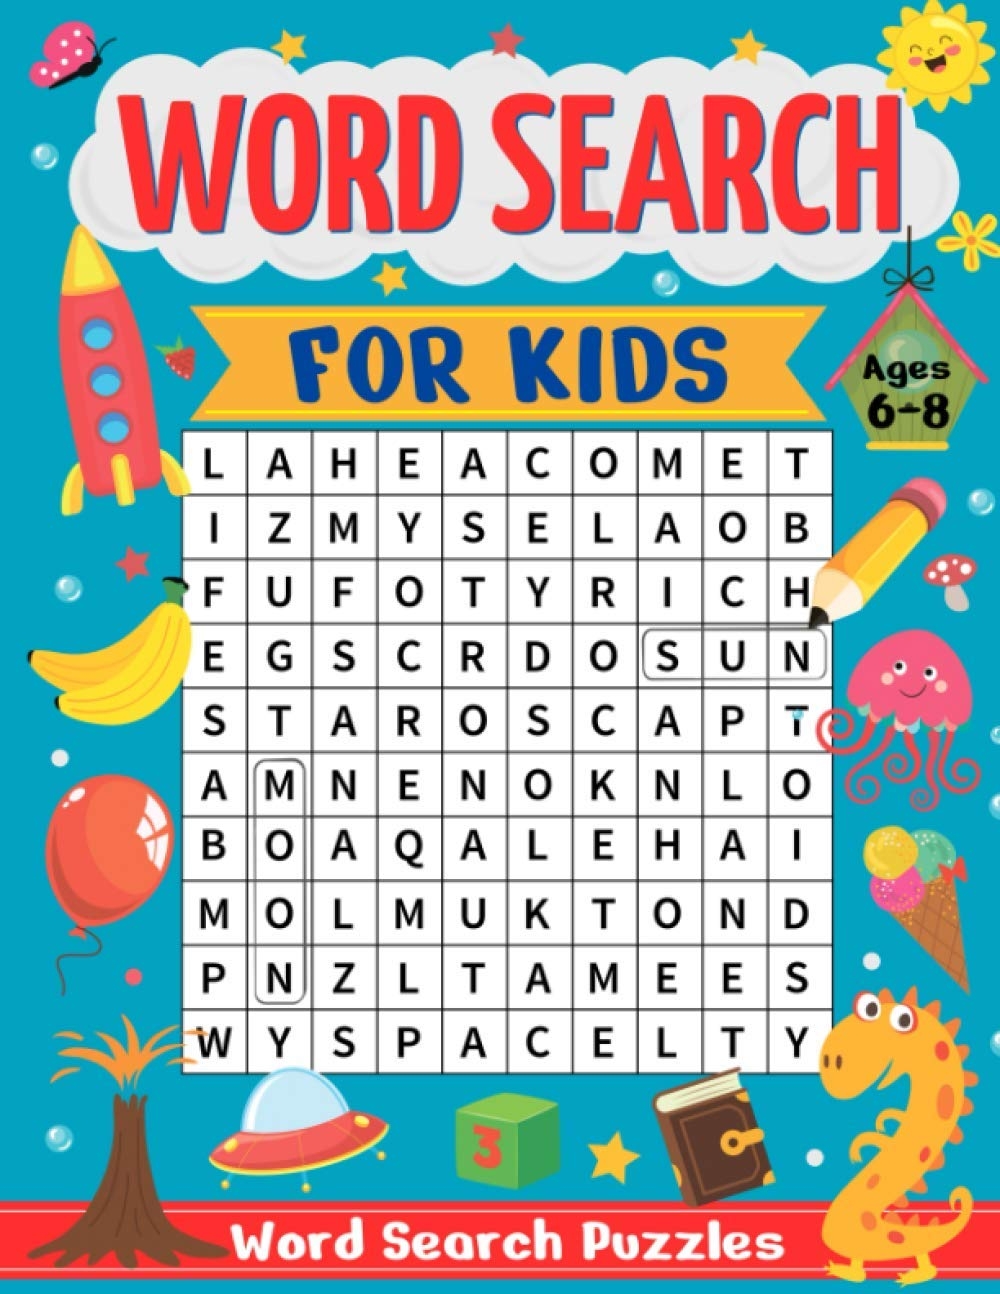 Word Search For Kids Ages 6 8 55 Fun And Educational Word Search Puzzles To Improve Vocabulary Spelling Memory And Logic Skills For Kids Lab Activity 9781099740978 Books Amazon ca